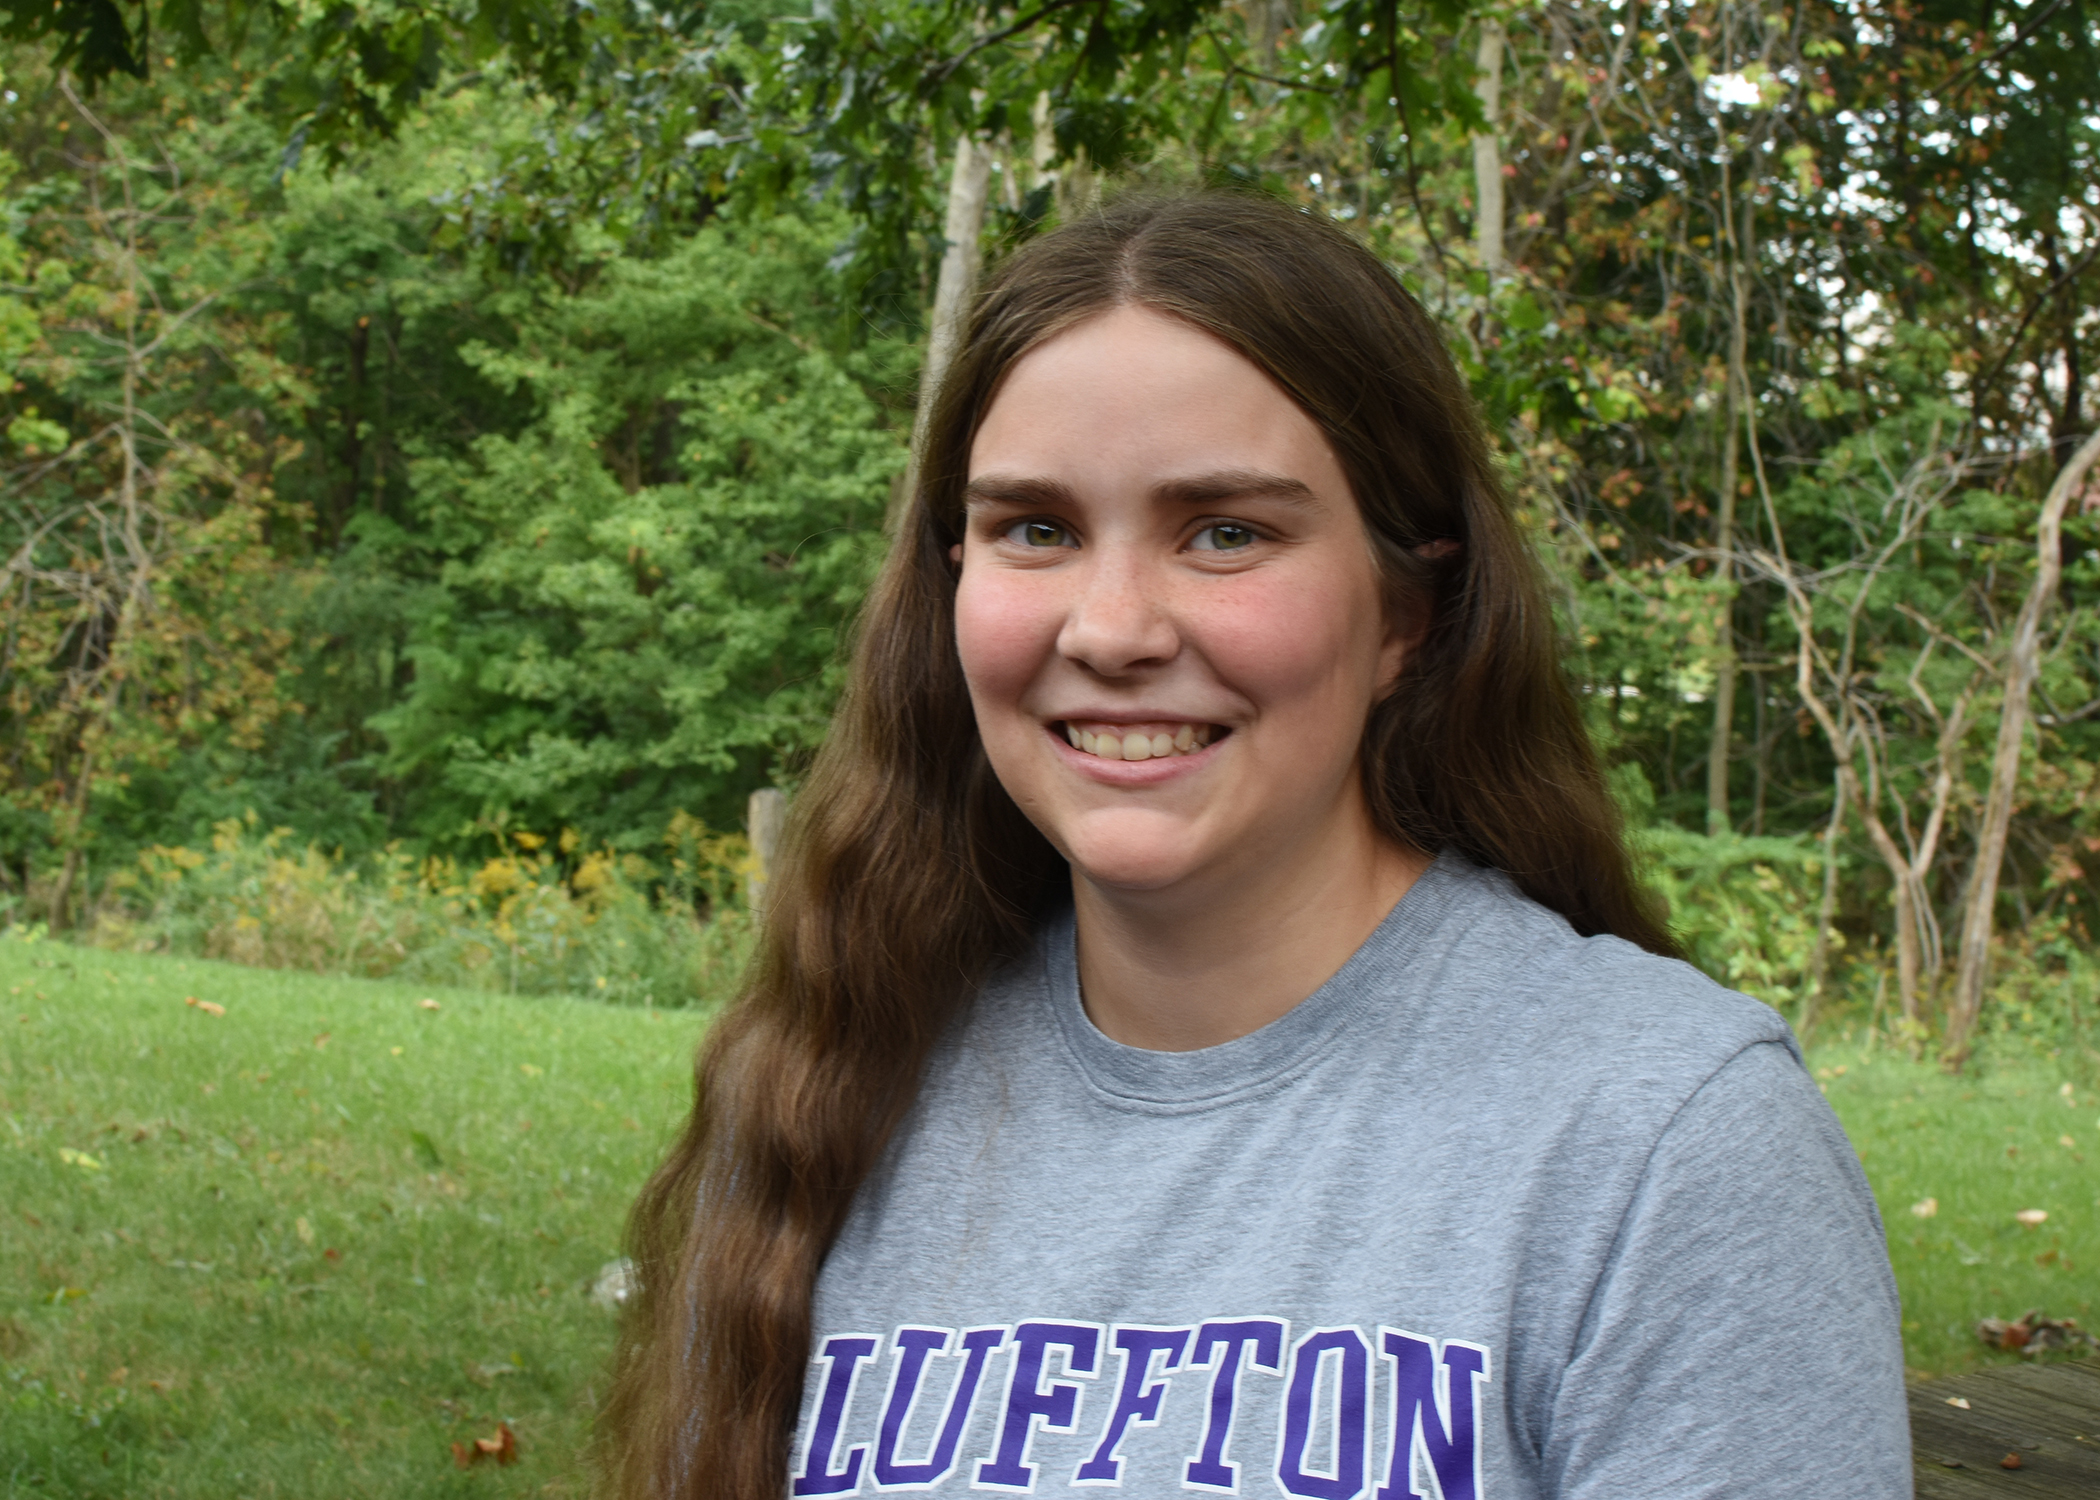 Bluffton University senior to present physics research completed in Hawaii